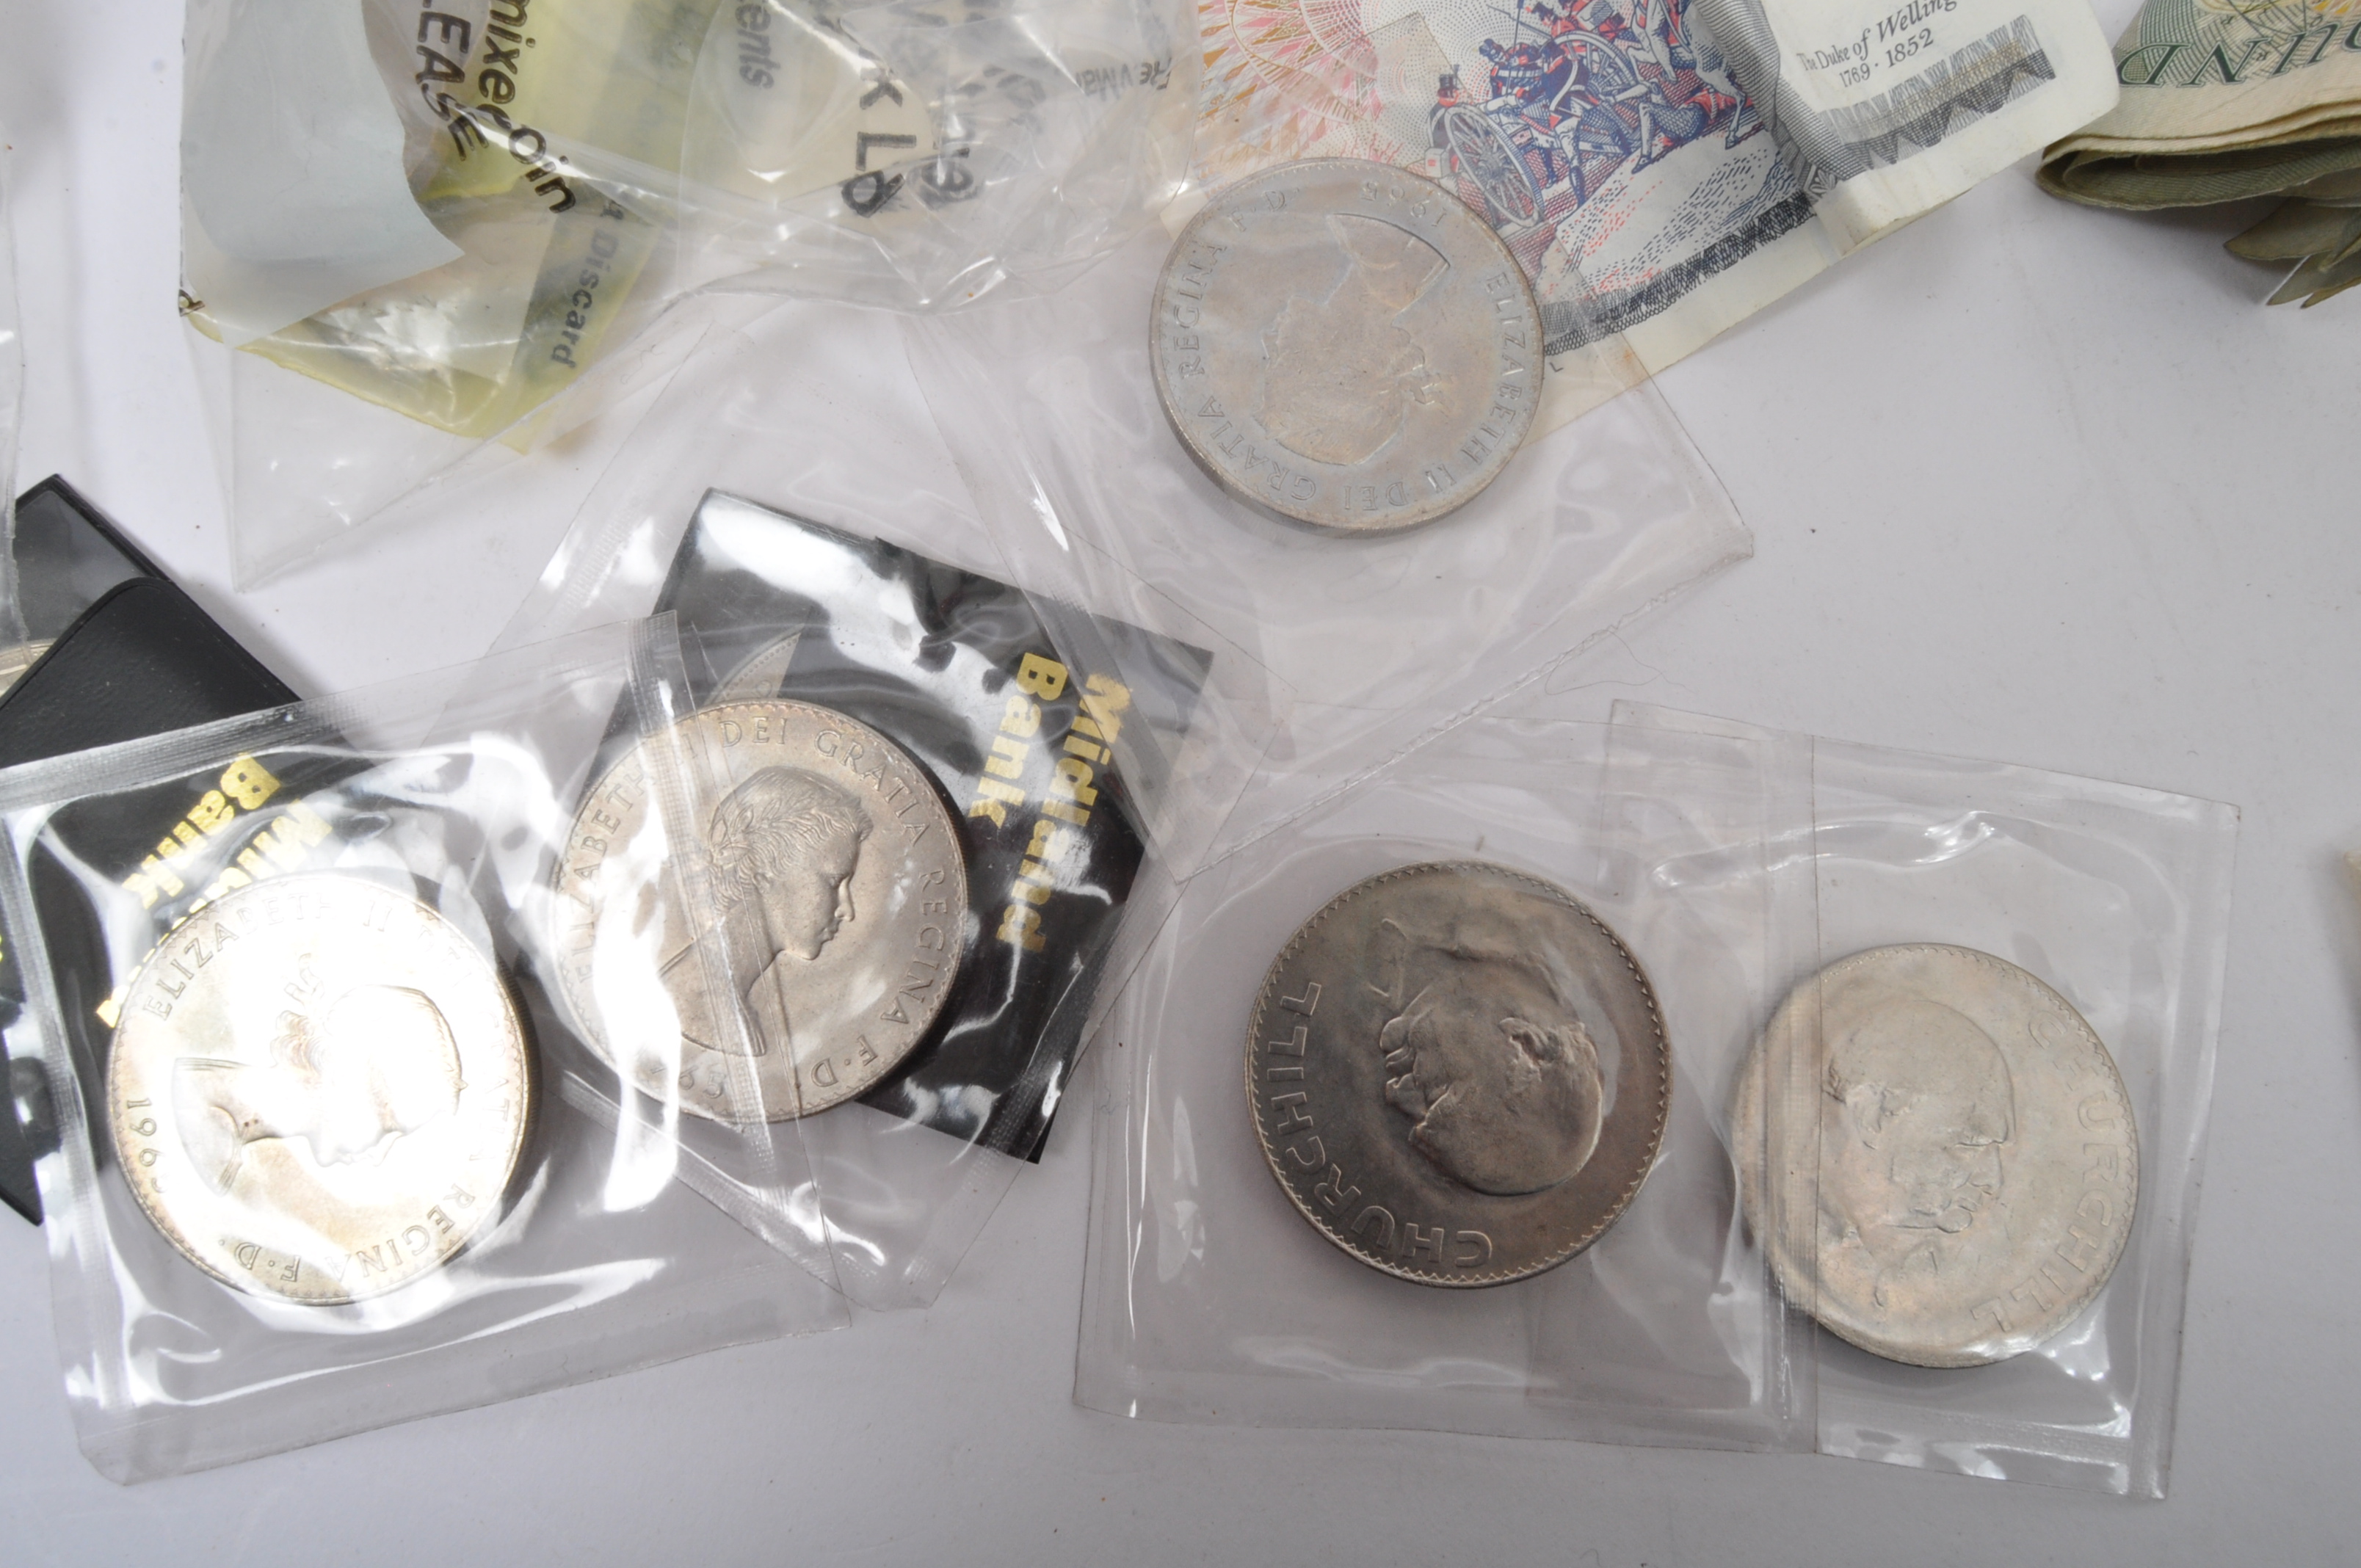 UNCIRCULATED UK & FOREIGN COIN NOTES CURRENCY COLLECTION - Image 3 of 6